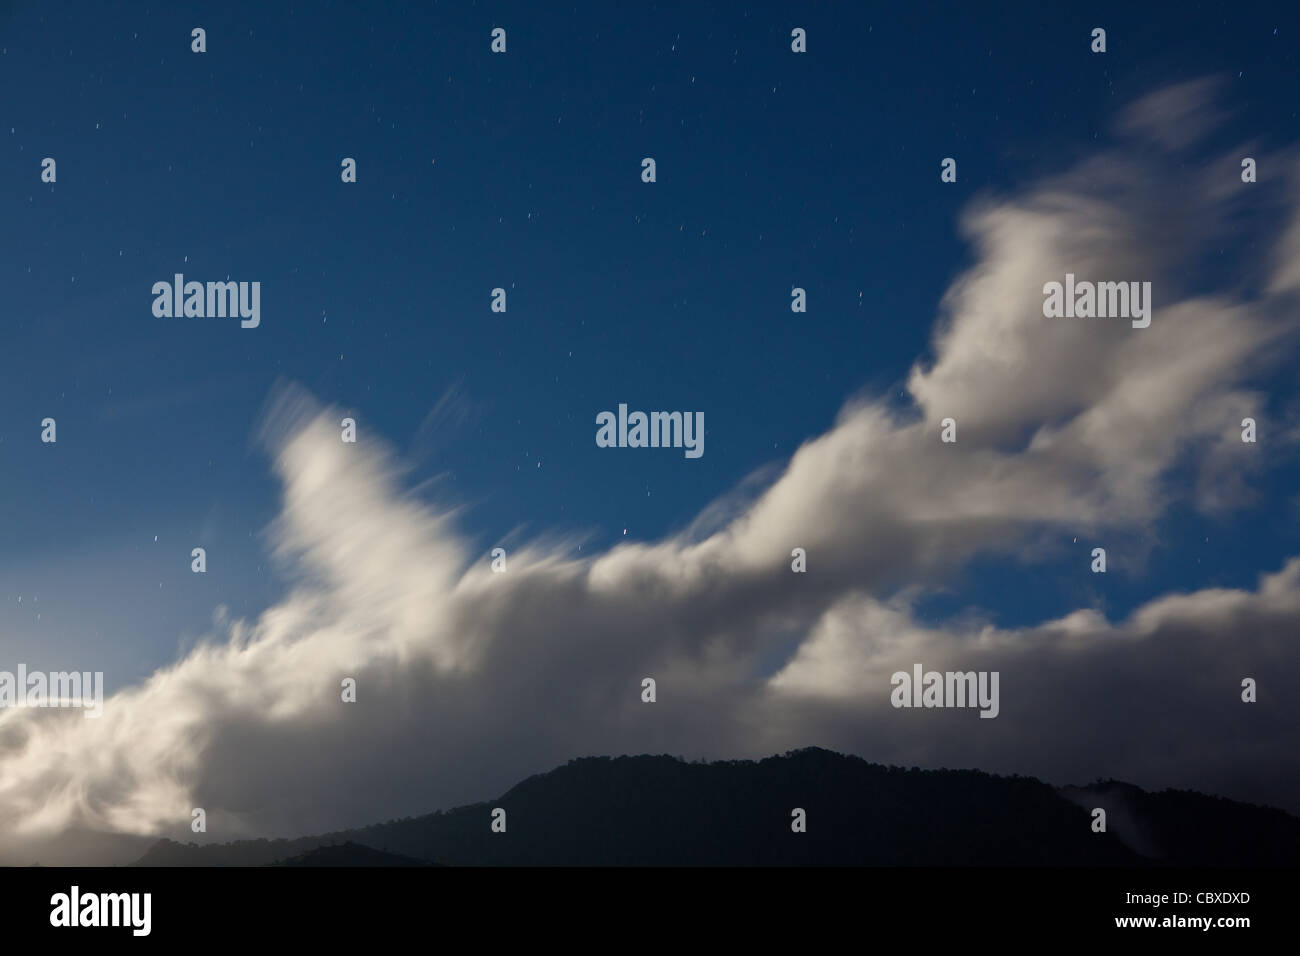 Moonlit clouds are drifting over Volcan Baru national park, Chiriqui province, Republic of Panama. Stock Photo